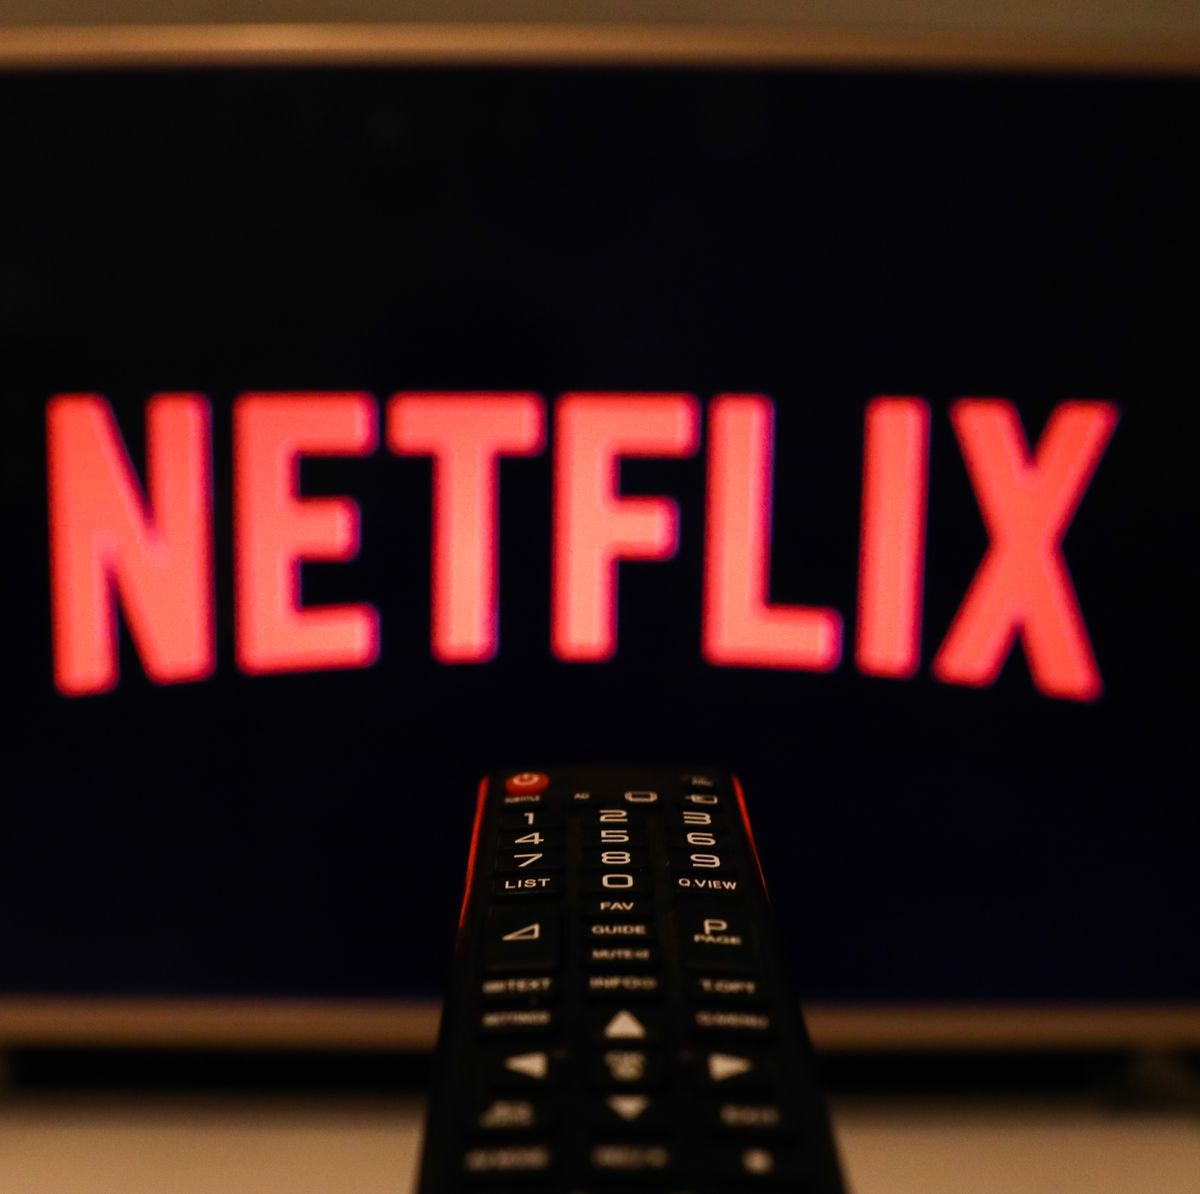 Netflix Supported Devices  Watch Netflix on your phone, TV or favorite  device